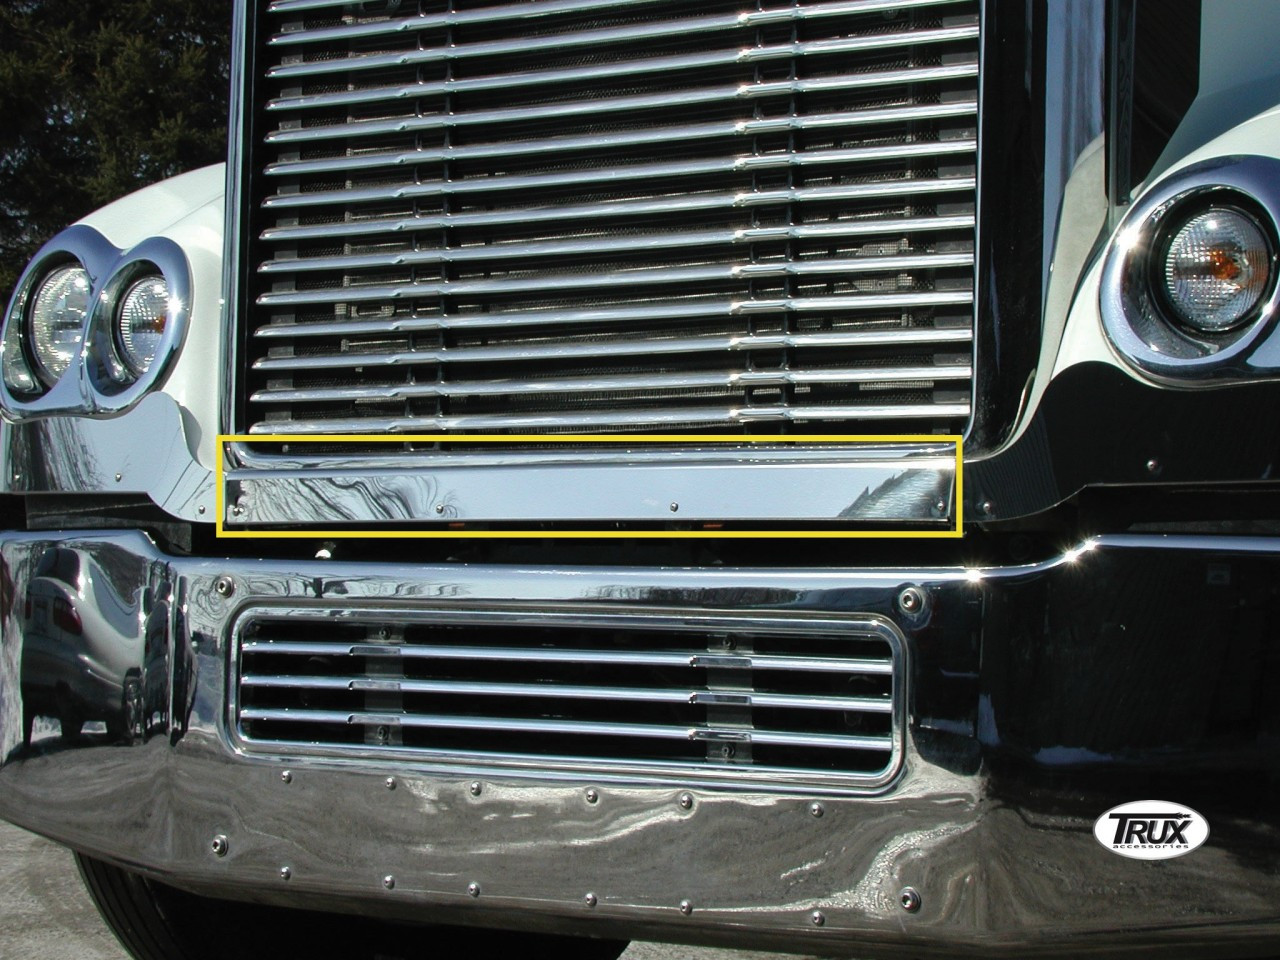 Freightliner Coronado Lower Grill Trim See Picture